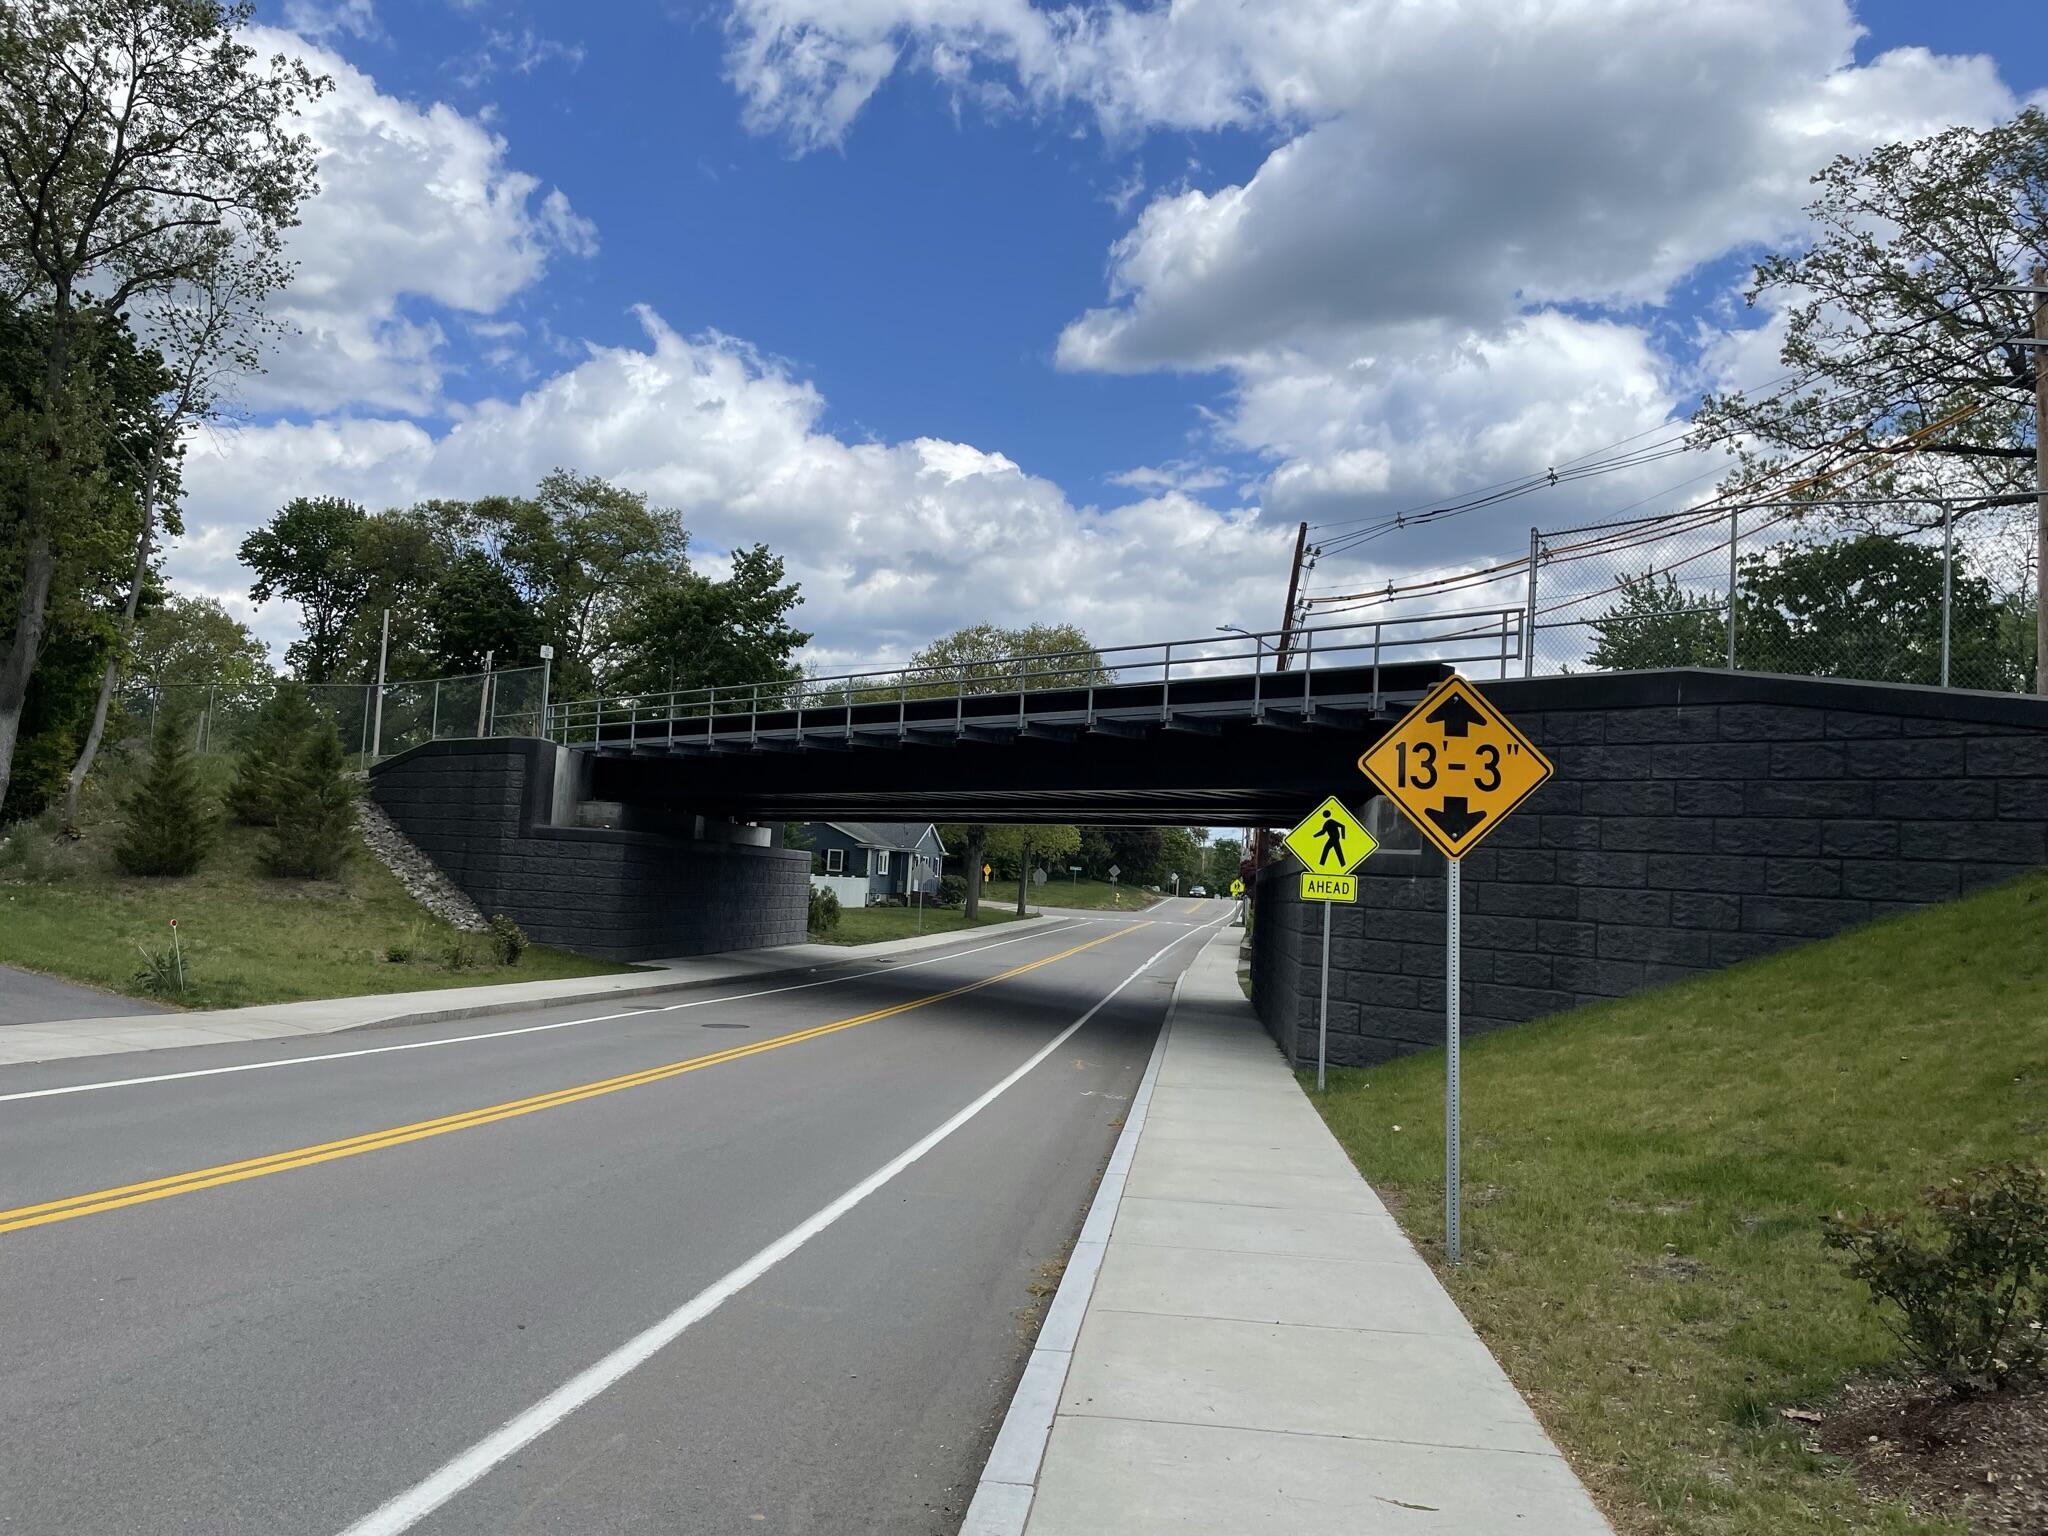 The completed bridge is viewed from a sidewalk down the road from the bridge. A sign showing that the bridge has a clearance of 13 feet and 3 inches is posted on the sidewalk just before the bridge; the previous bridge was under 11 feet high. 